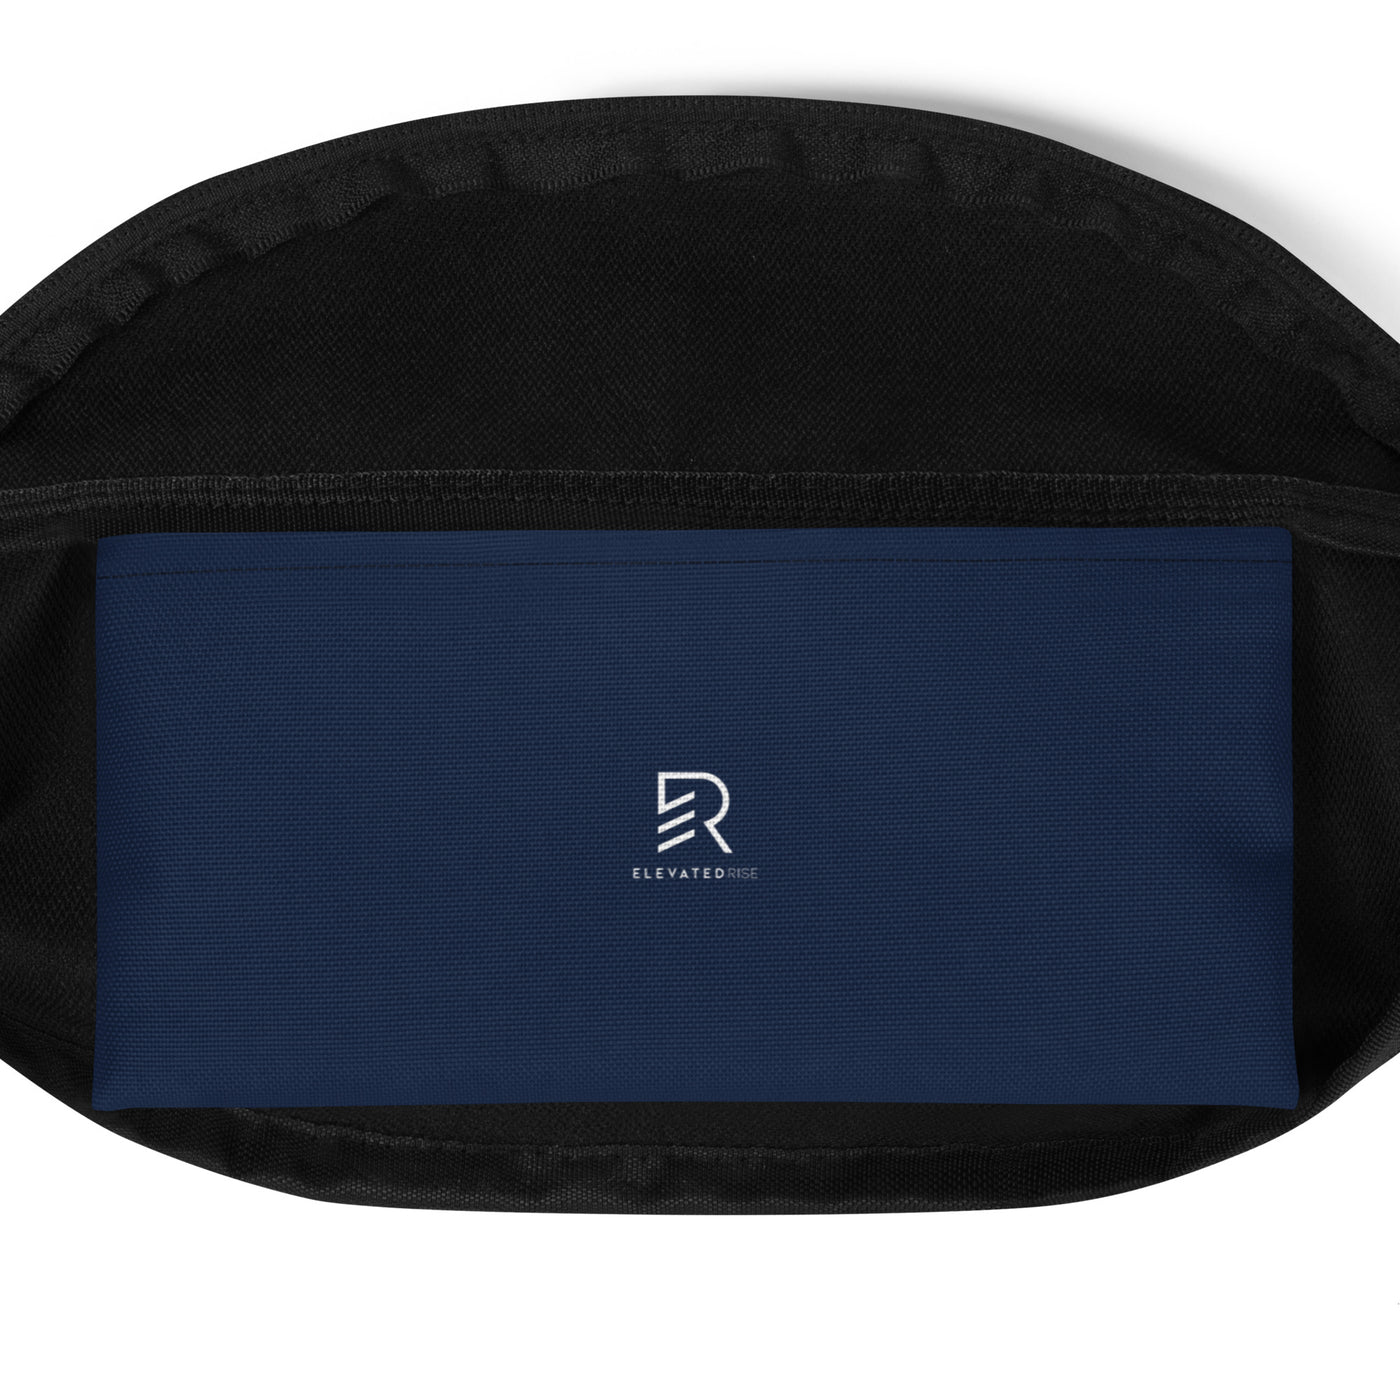 Navy Fanny Pack - Focus On Your Goals